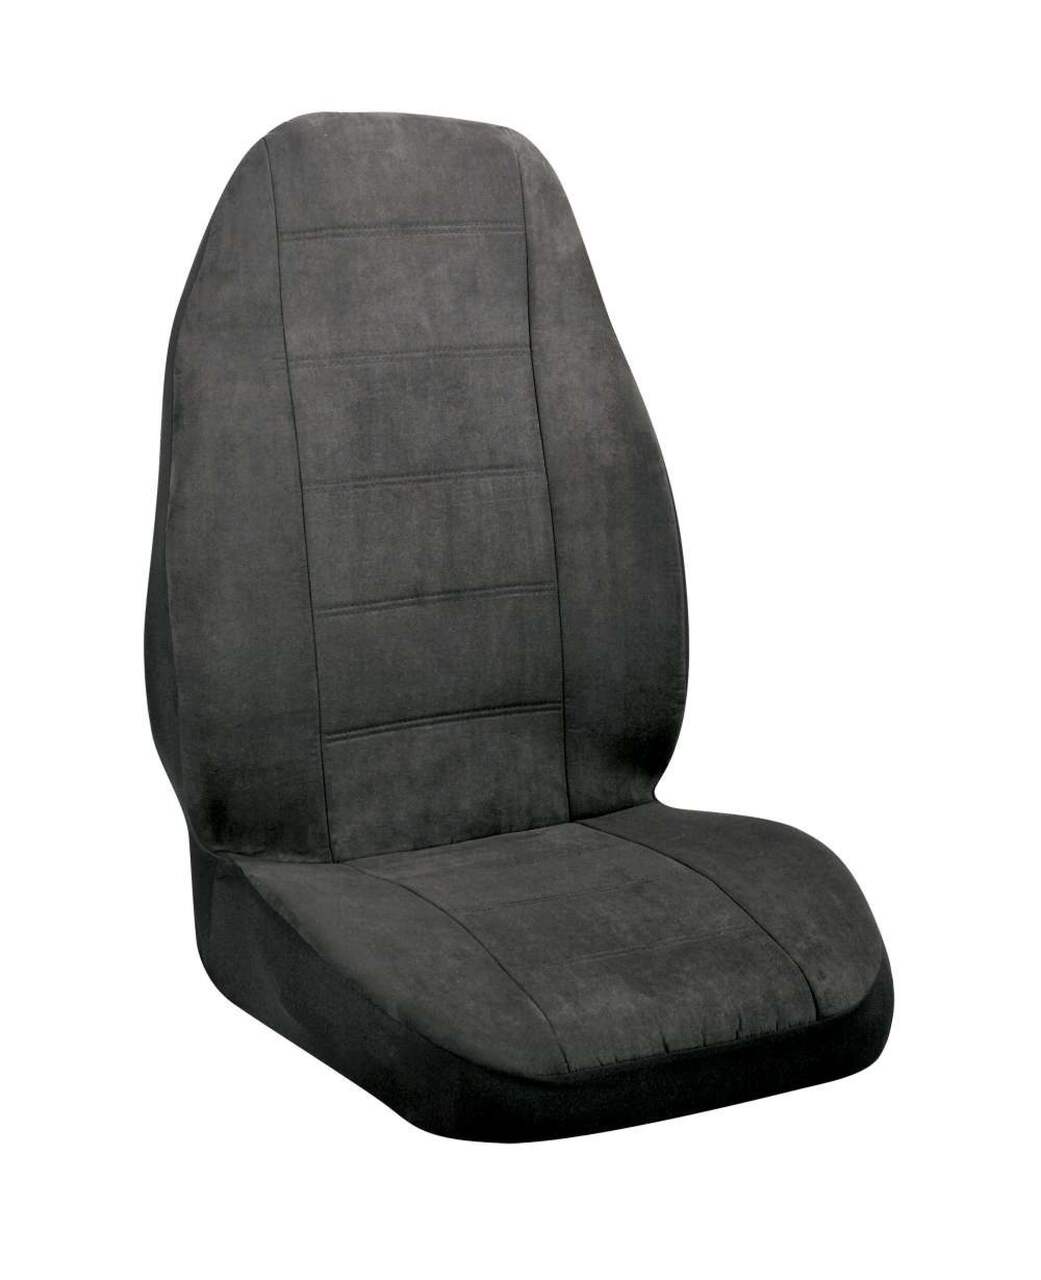 https://media-www.canadiantire.ca/product/automotive/car-care-accessories/auto-comfort/0323508/autotrends-heated-seat-cover-1380b29e-d063-4805-affb-67ab93688f4f-jpgrendition.jpg?imdensity=1&imwidth=640&impolicy=mZoom